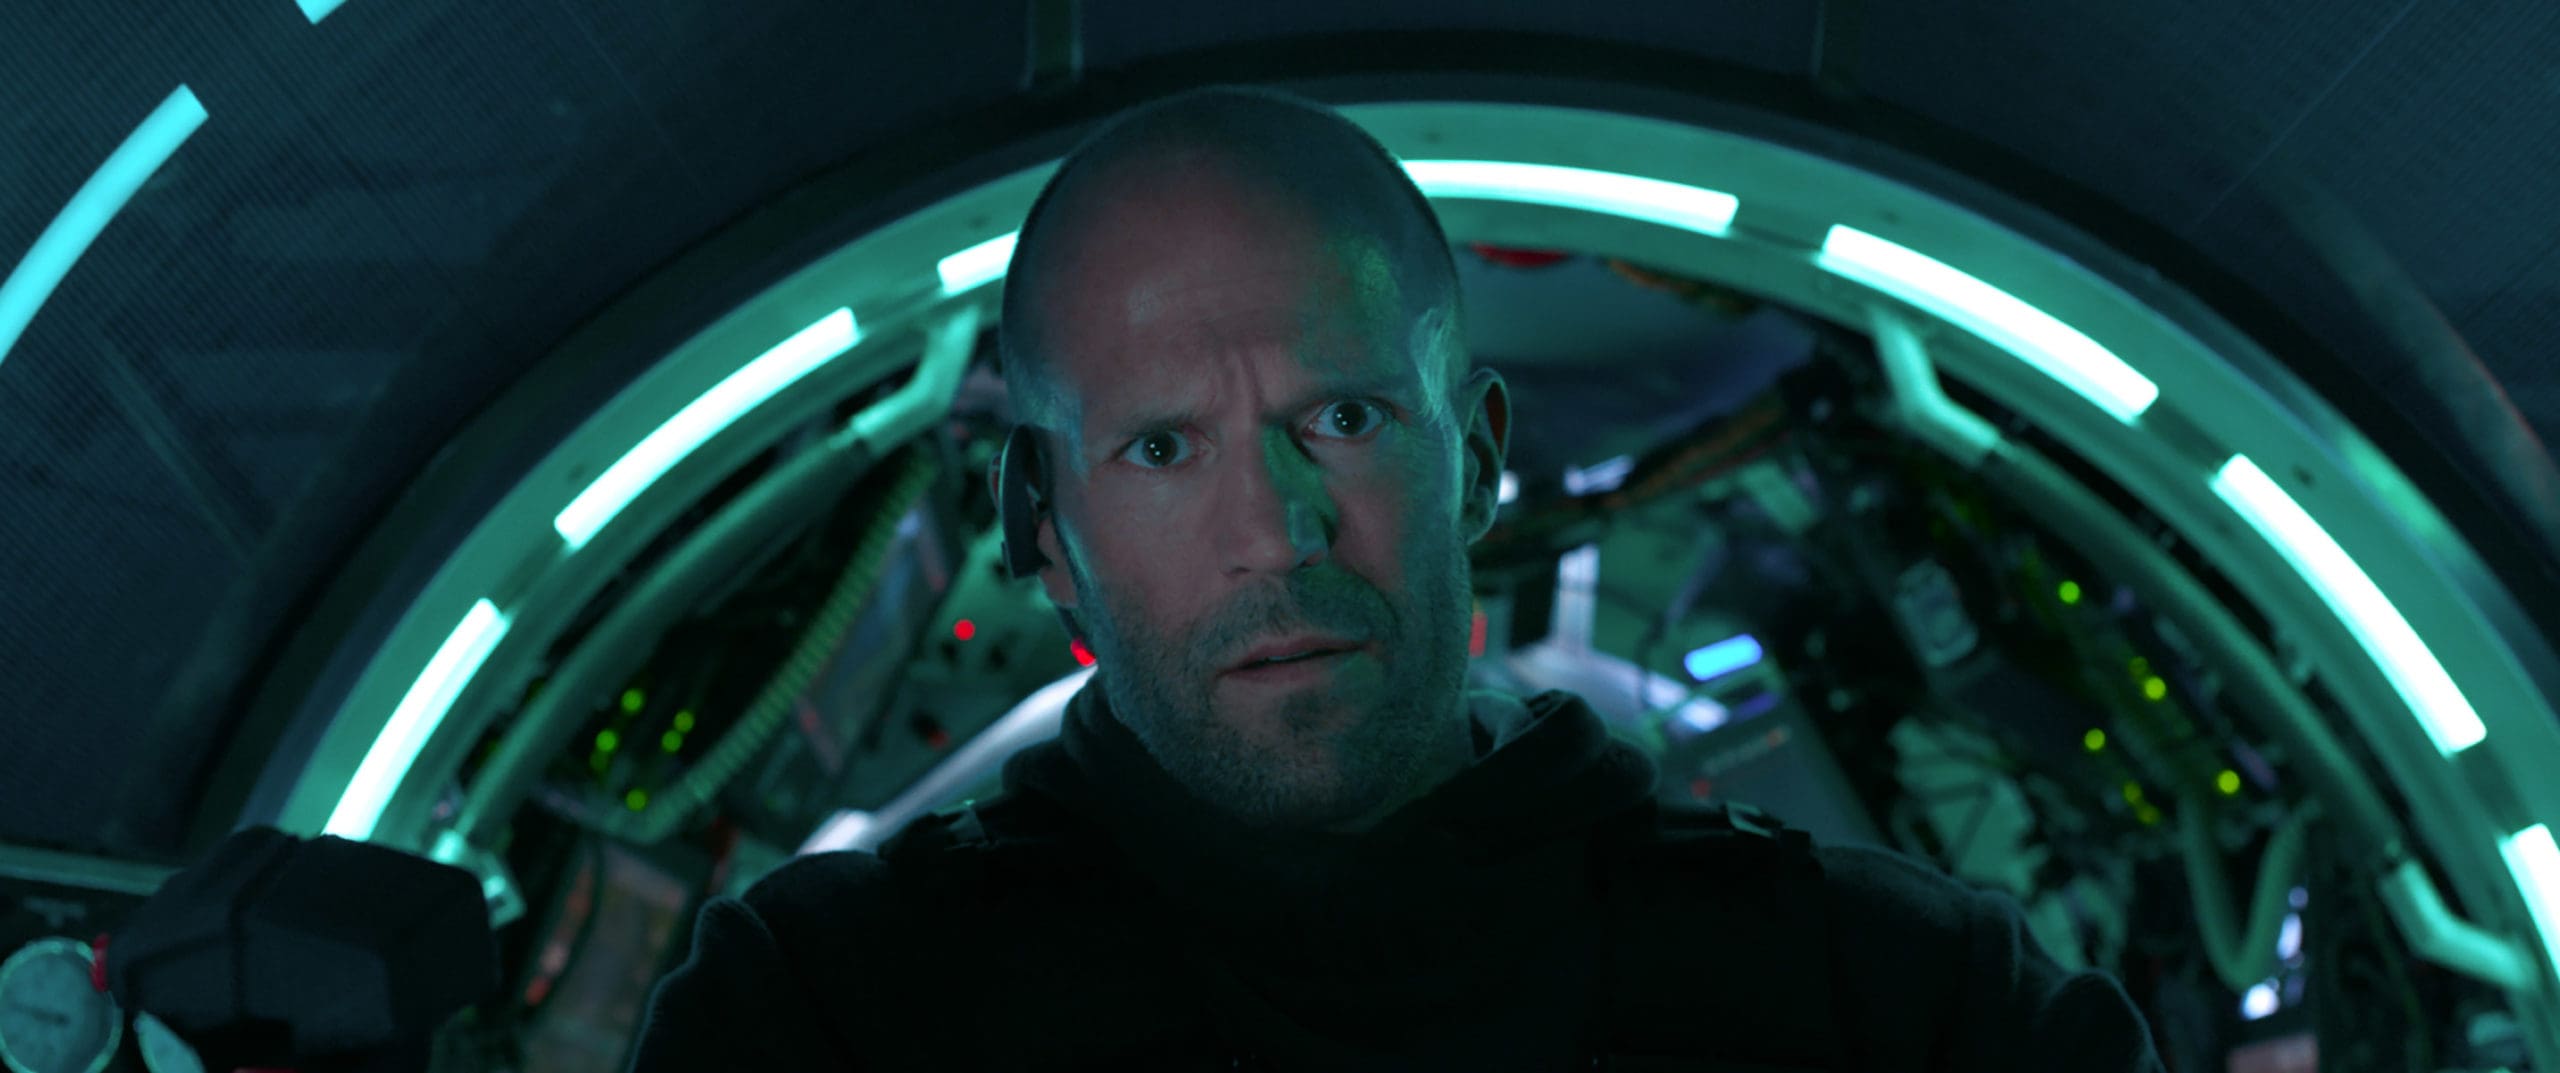 (L-R) CLIFF CURTIS as Mac, JASON STATHAM as Jonas Taylor, RUBY ROSE as Jaxx, LI BINGBING as Suyin, JESSICA McNAMEE as Lori, PAGE KENNEDY as DJ and SOPHIA CAI as Meiying in Warner Bros. Pictures' and Gravity Pictures¿ science fiction action thriller "THE MEG," a Gravity Pictures release for China, and a Warner Bros. Pictures release throughout the rest of the world.